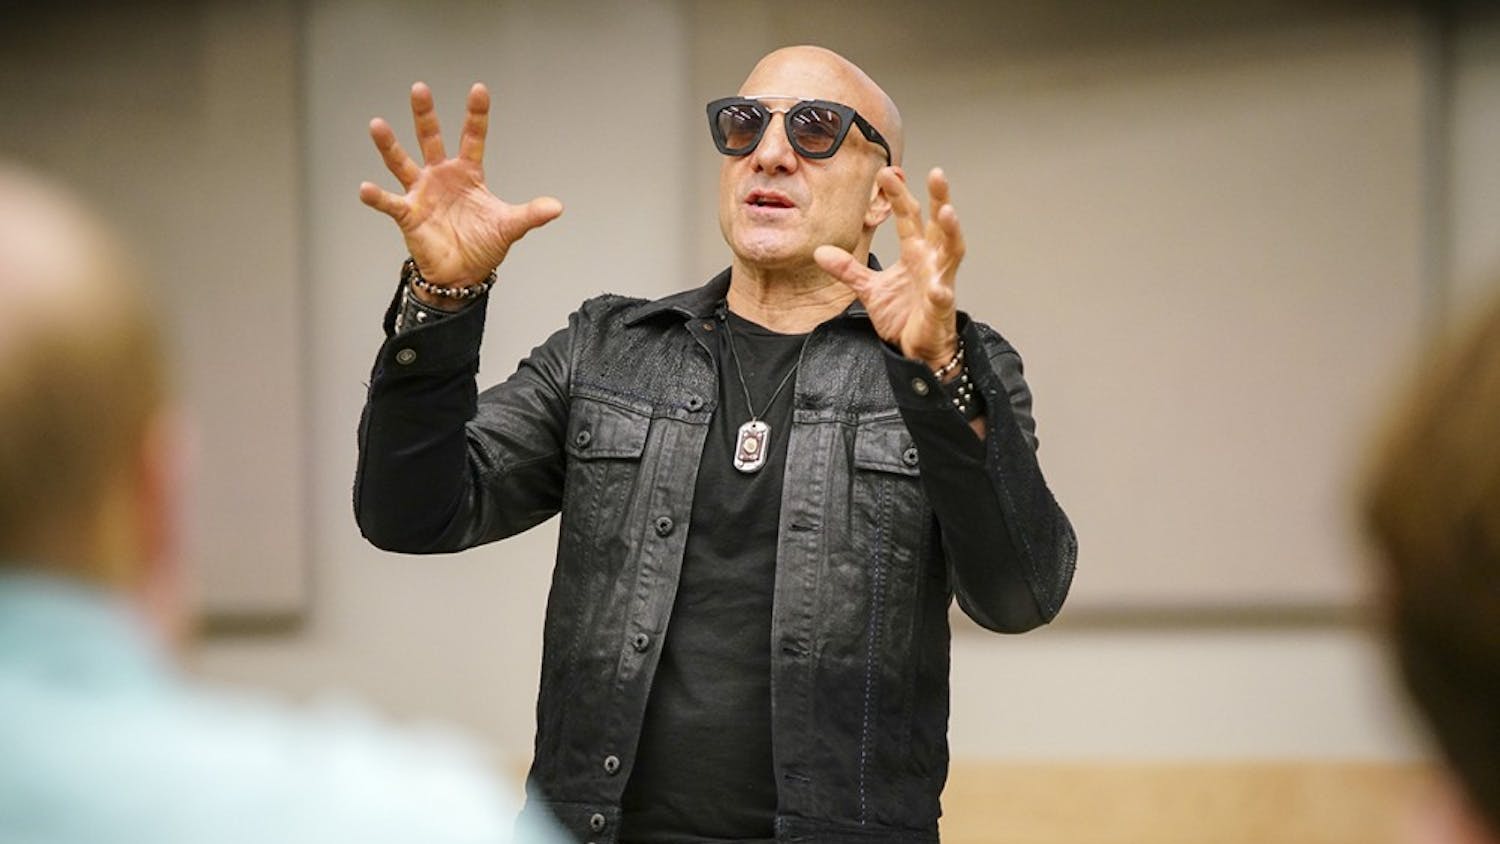 Drummer Kenny Aronoff reveals life stories, discusses music theory and shares tips on professionalism in the music industry during his meet and greet hosted by Project Jumpstart on Saturday morning in the Musical Arts Center. Project Jumpstart is a student-led initiative in the Jacobs School of Music that aims to teach music students entrepreneurial skills to take charge in their future careers in the music industry.